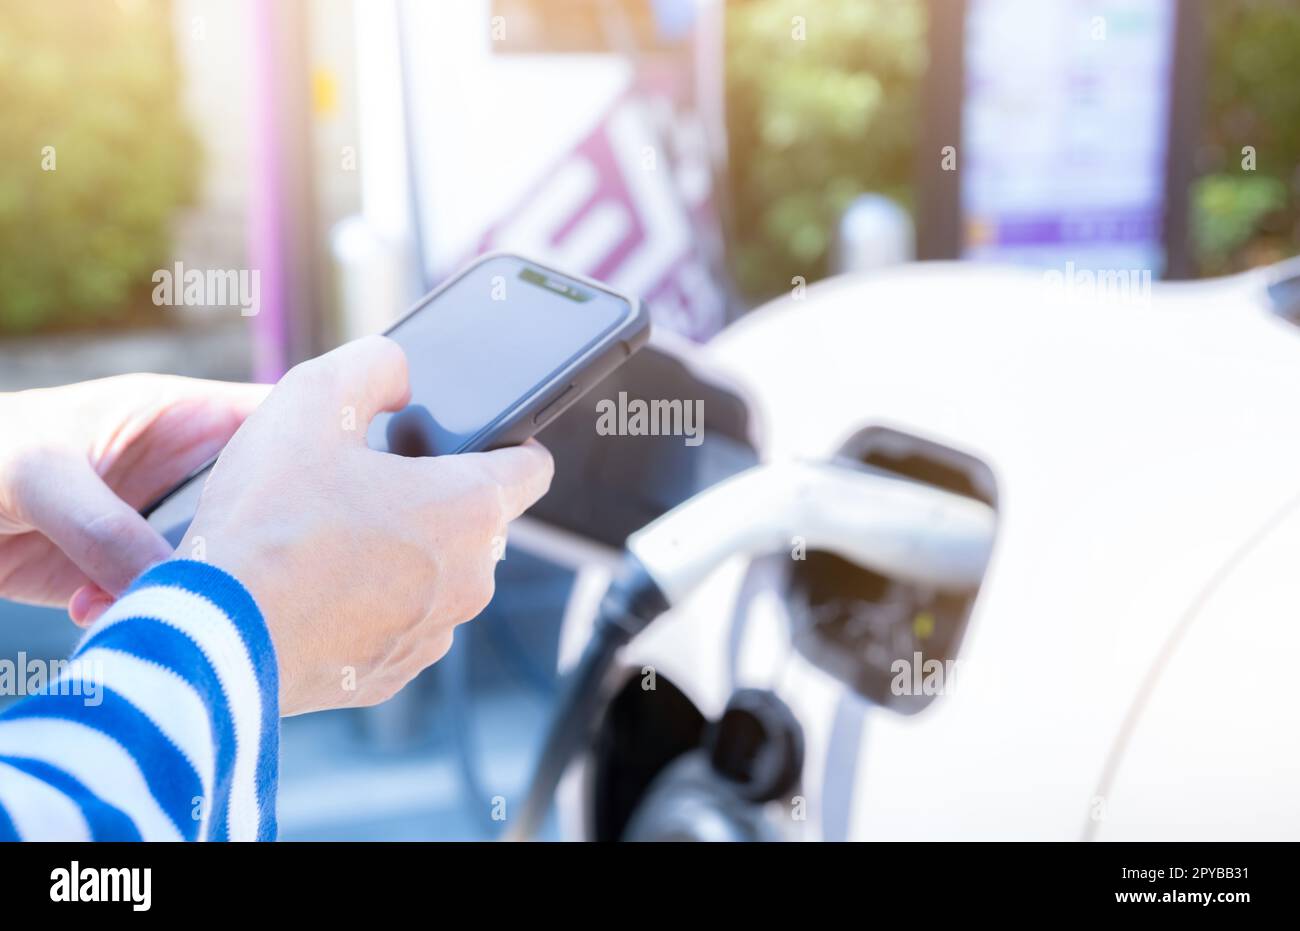 Woman using smartphone paying service in mobile app on blur EV car charging at electric vehicle charging station. EV car charging point. Commercial EV car charging station. Sustainability lifestyle. Stock Photo